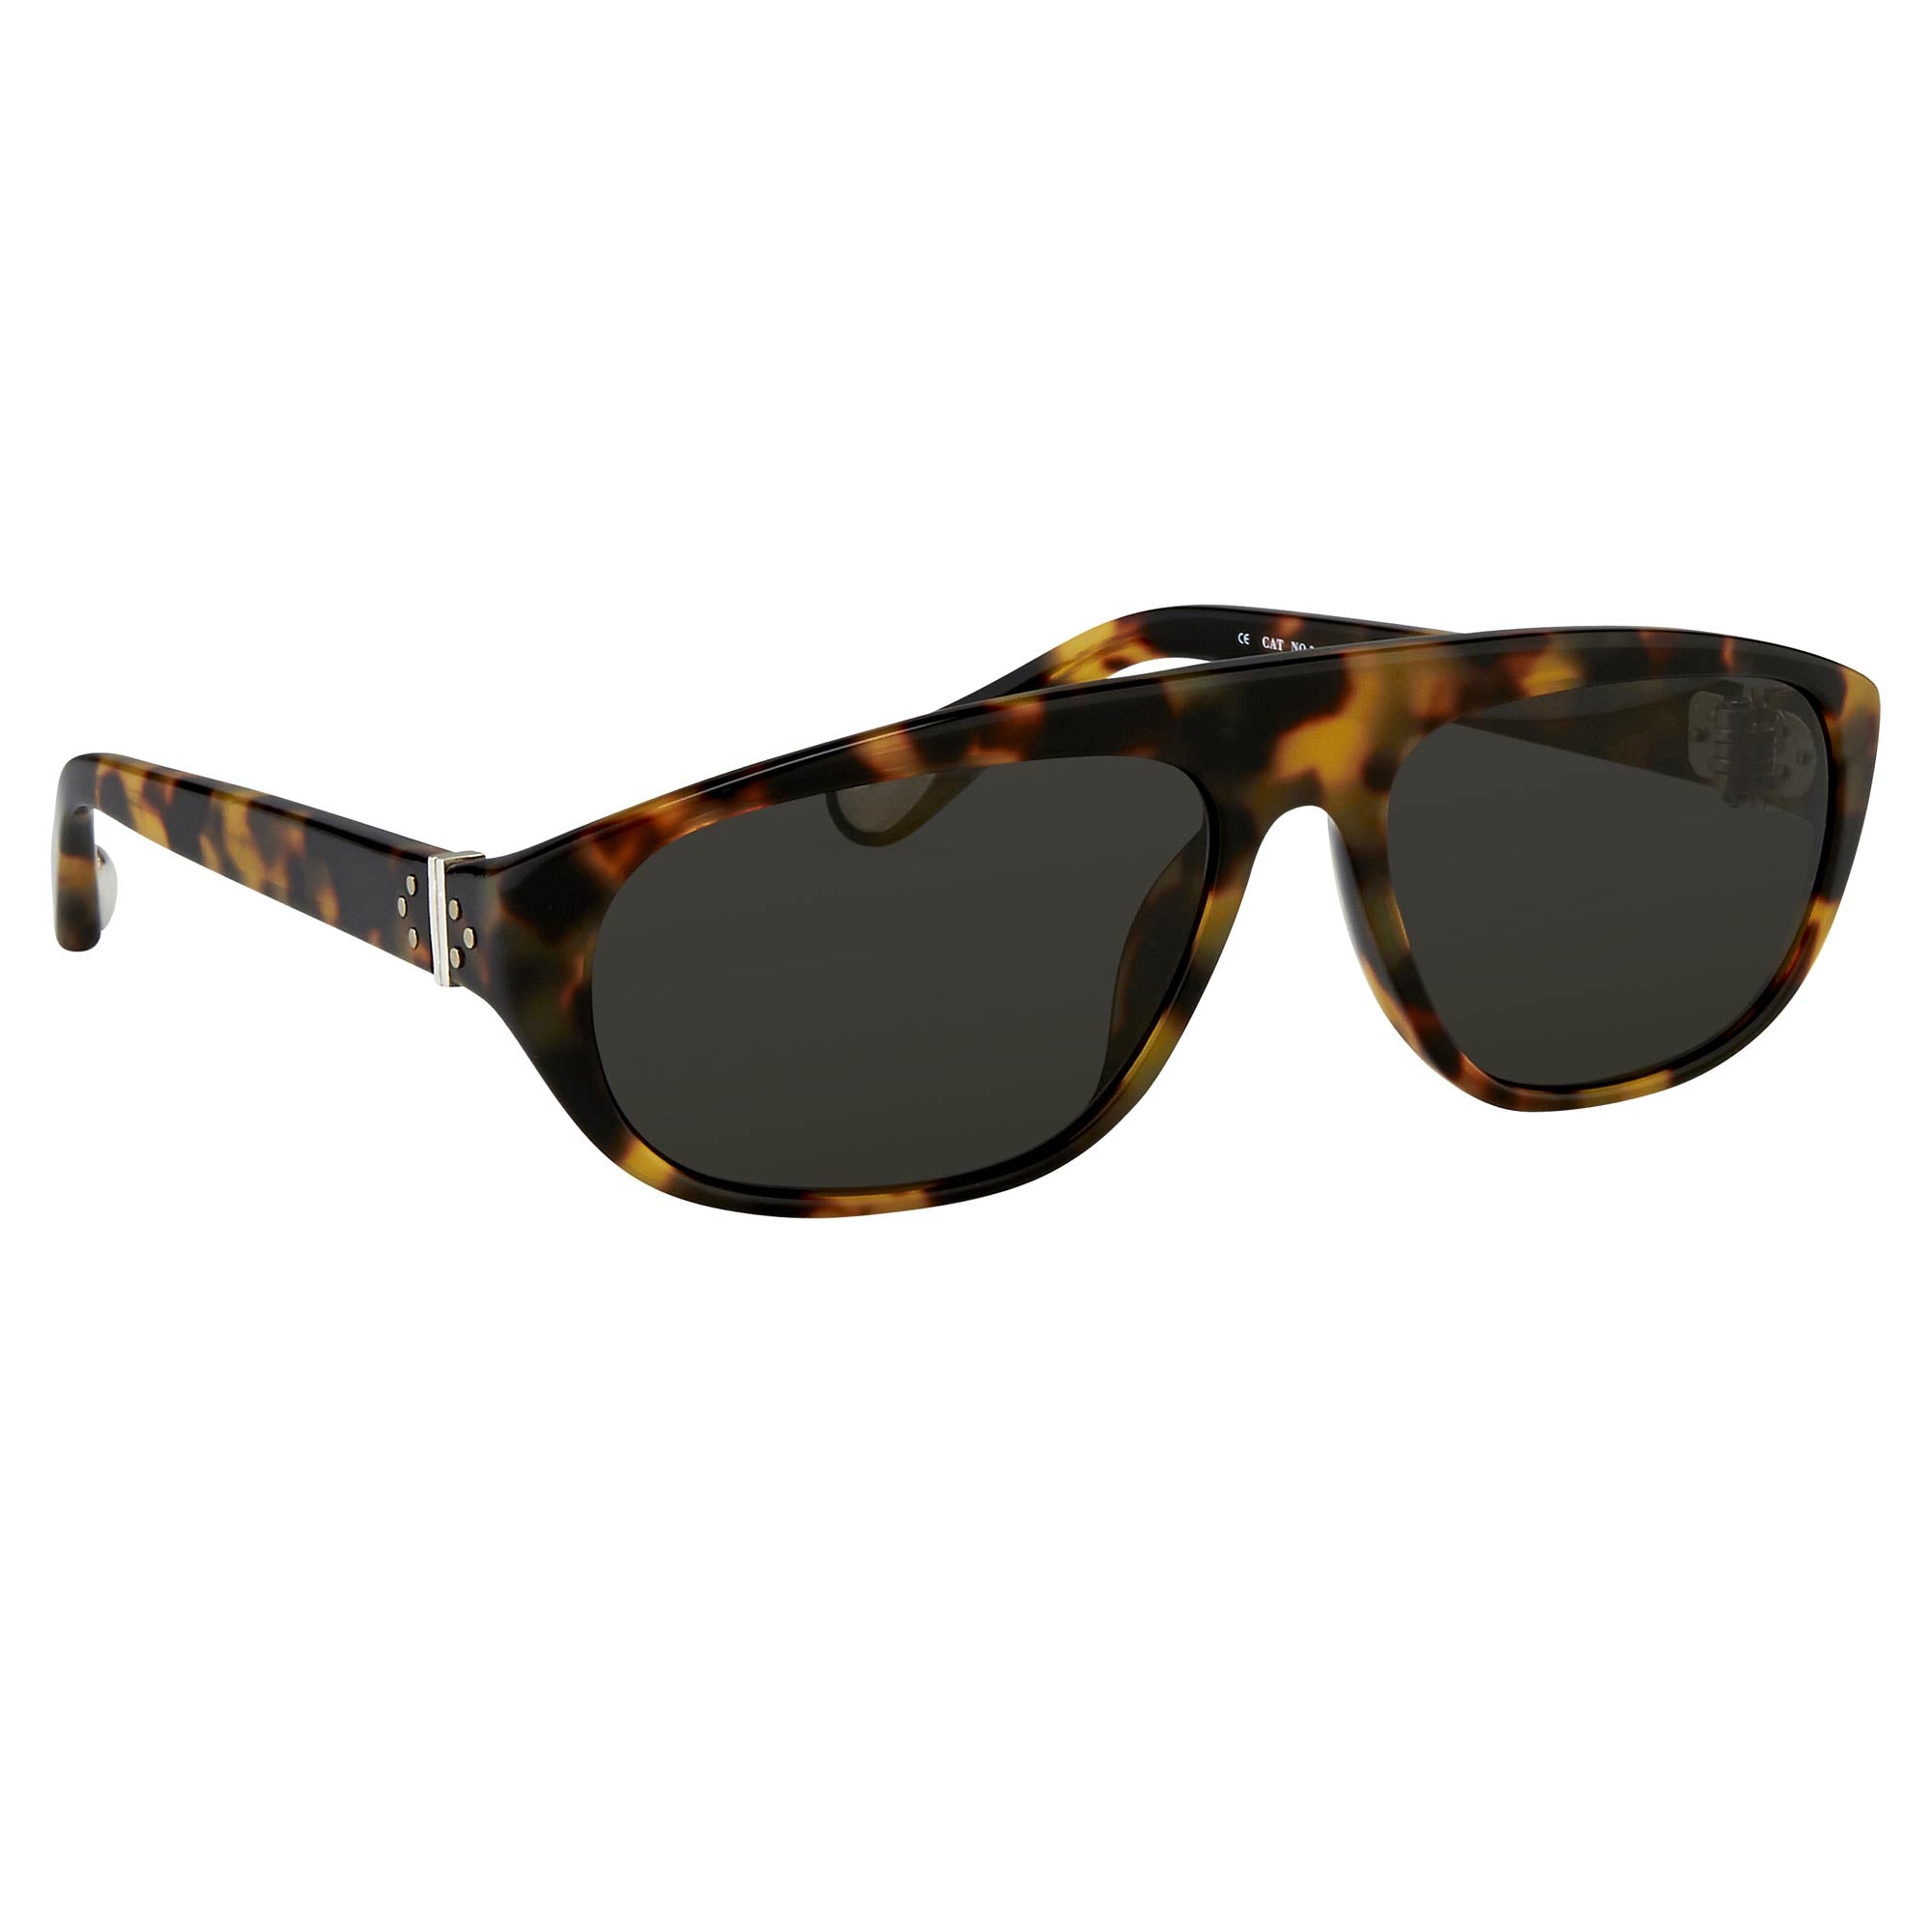 Ann Demeulemeester Sunglasses Tortoise Shell 925 Silver with Grey Lenses CAT3 AD1C2SUN - Watches & Crystals